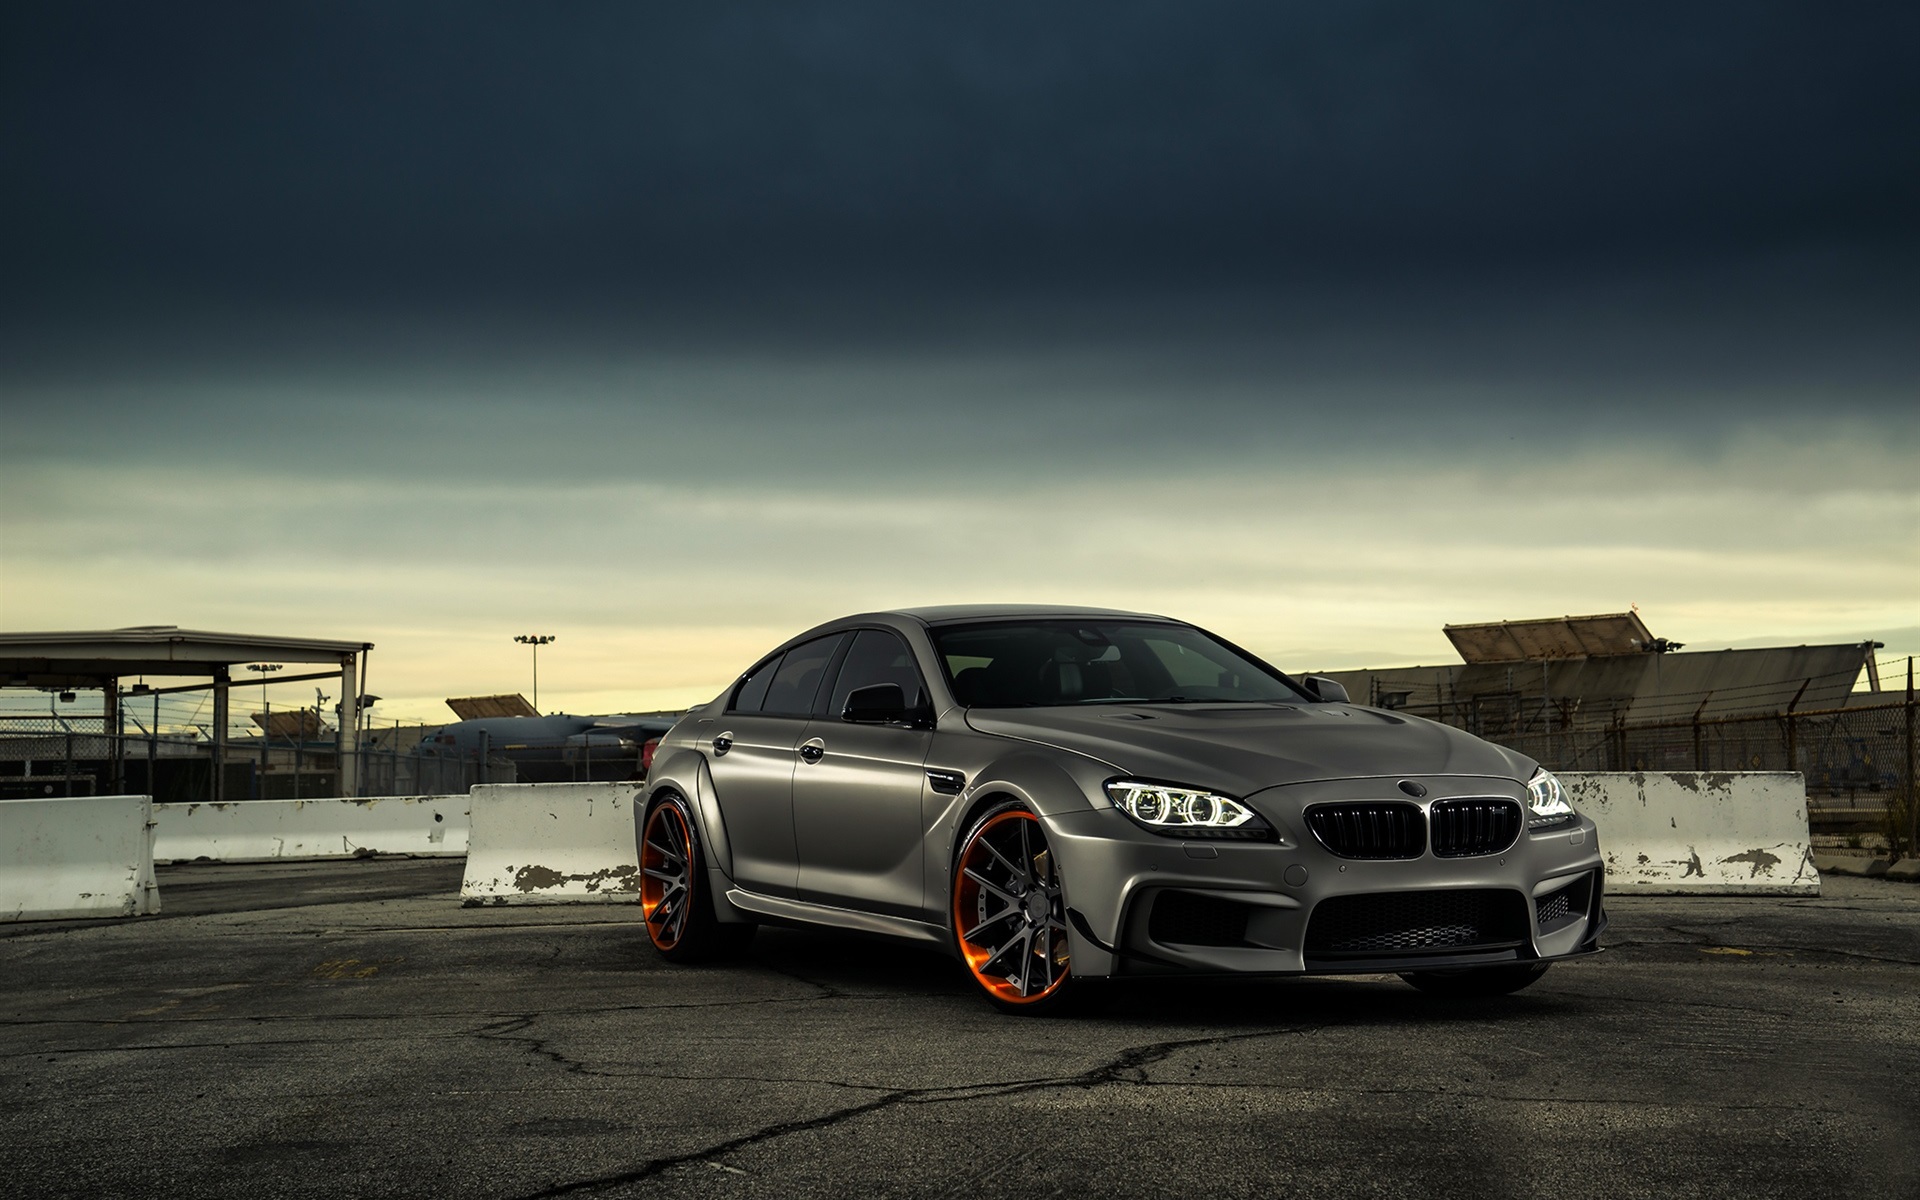 48+ Android Hd Wallpaper Black 2017 Bmw M6 HD download